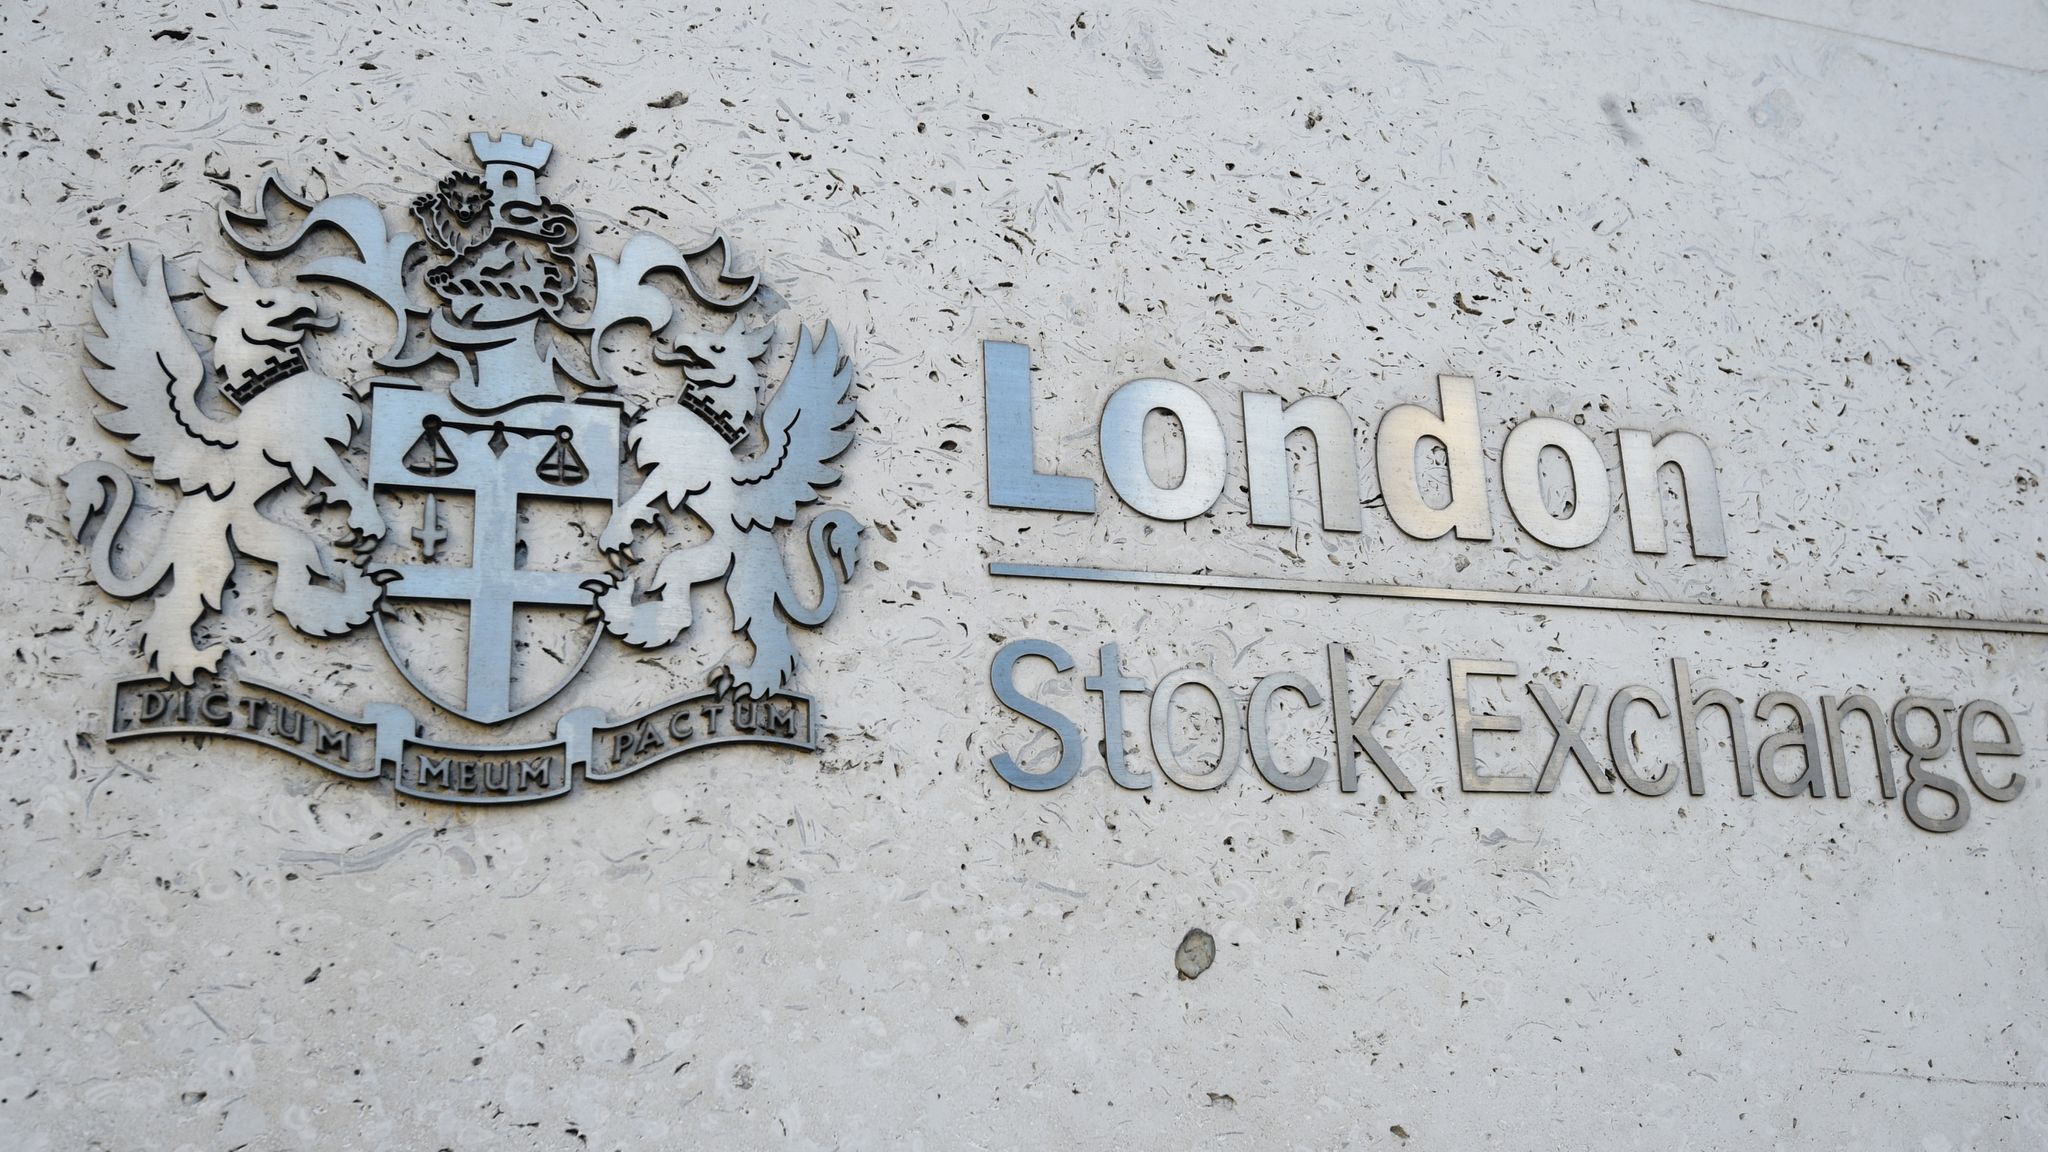 The Complete List of Russian Companies Listed on London Stock Exchange